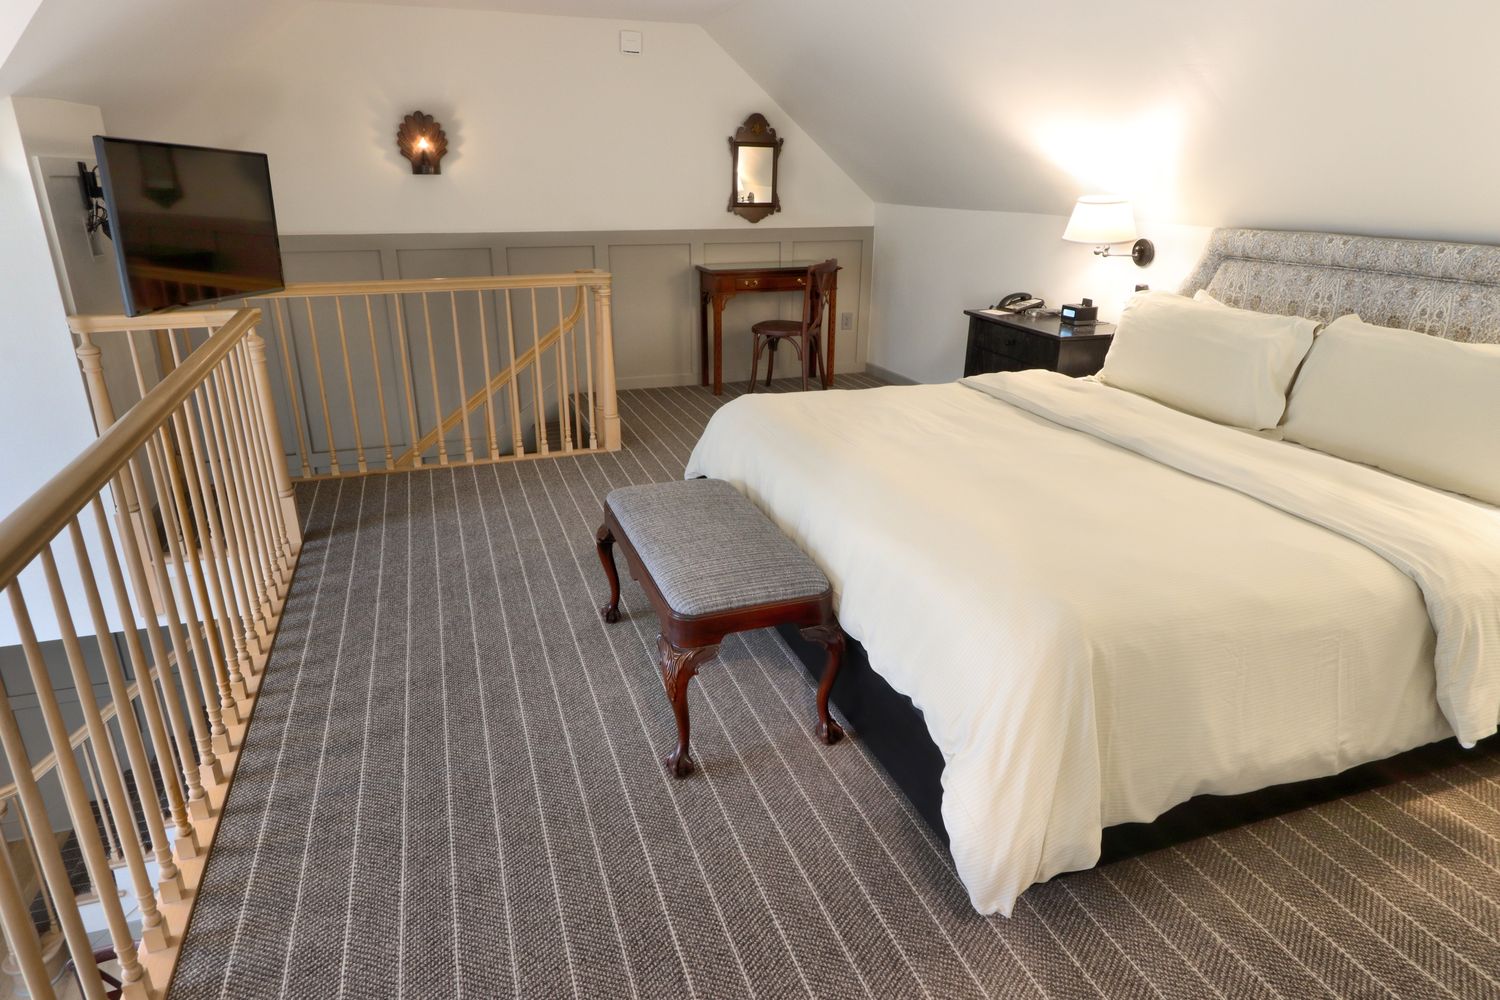 The upper level and King bed in Room 110 at The Golden Plough Inn.